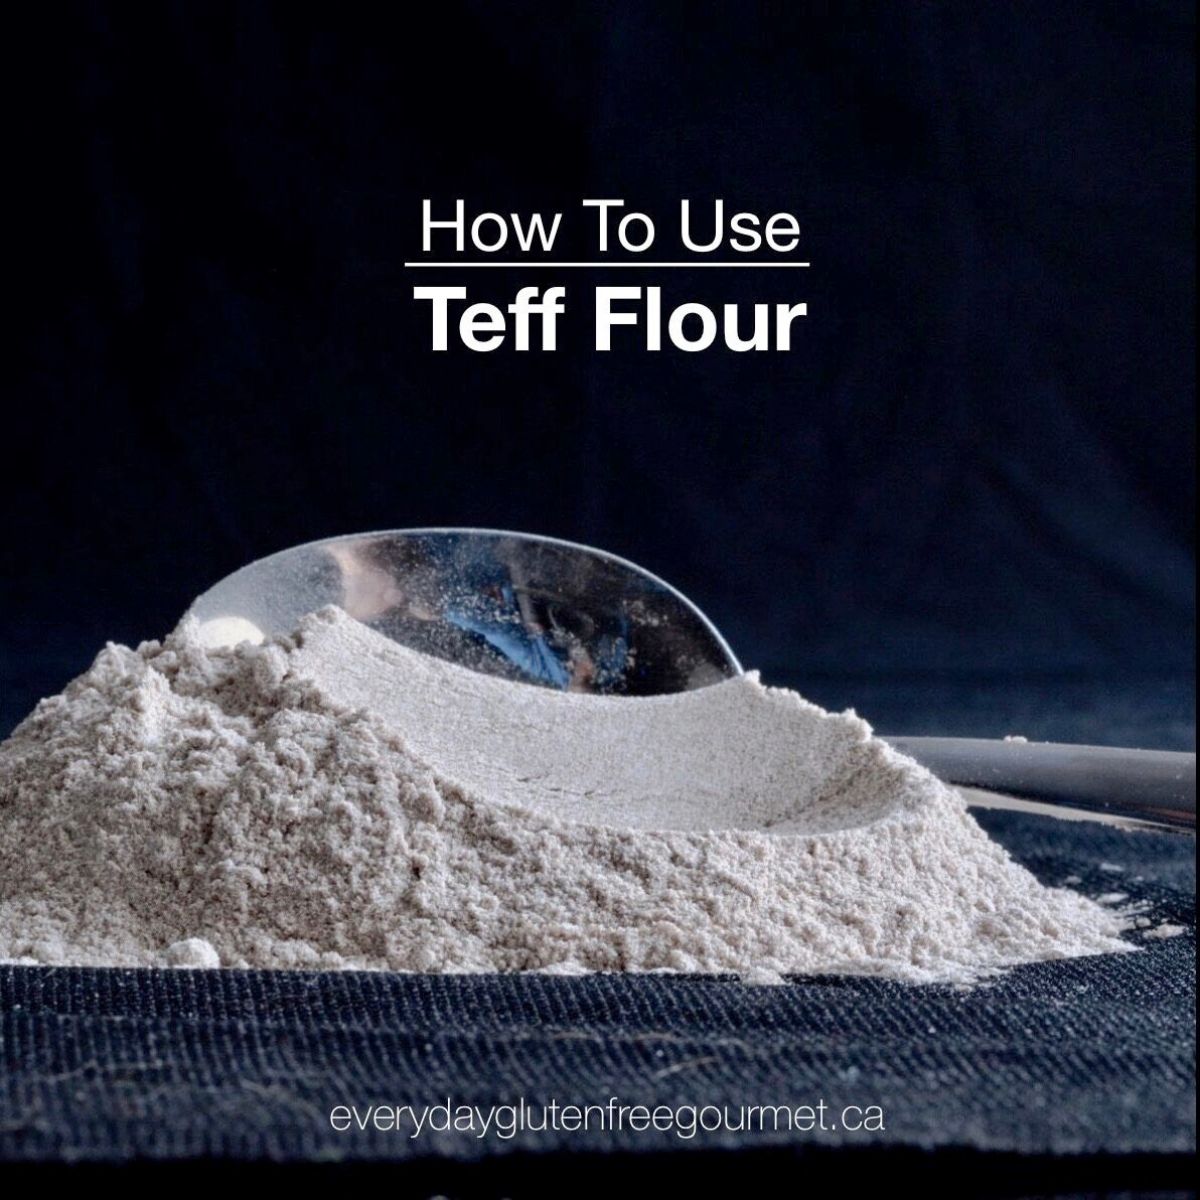 Black background with a pile of teff flour and a spoon behind it.